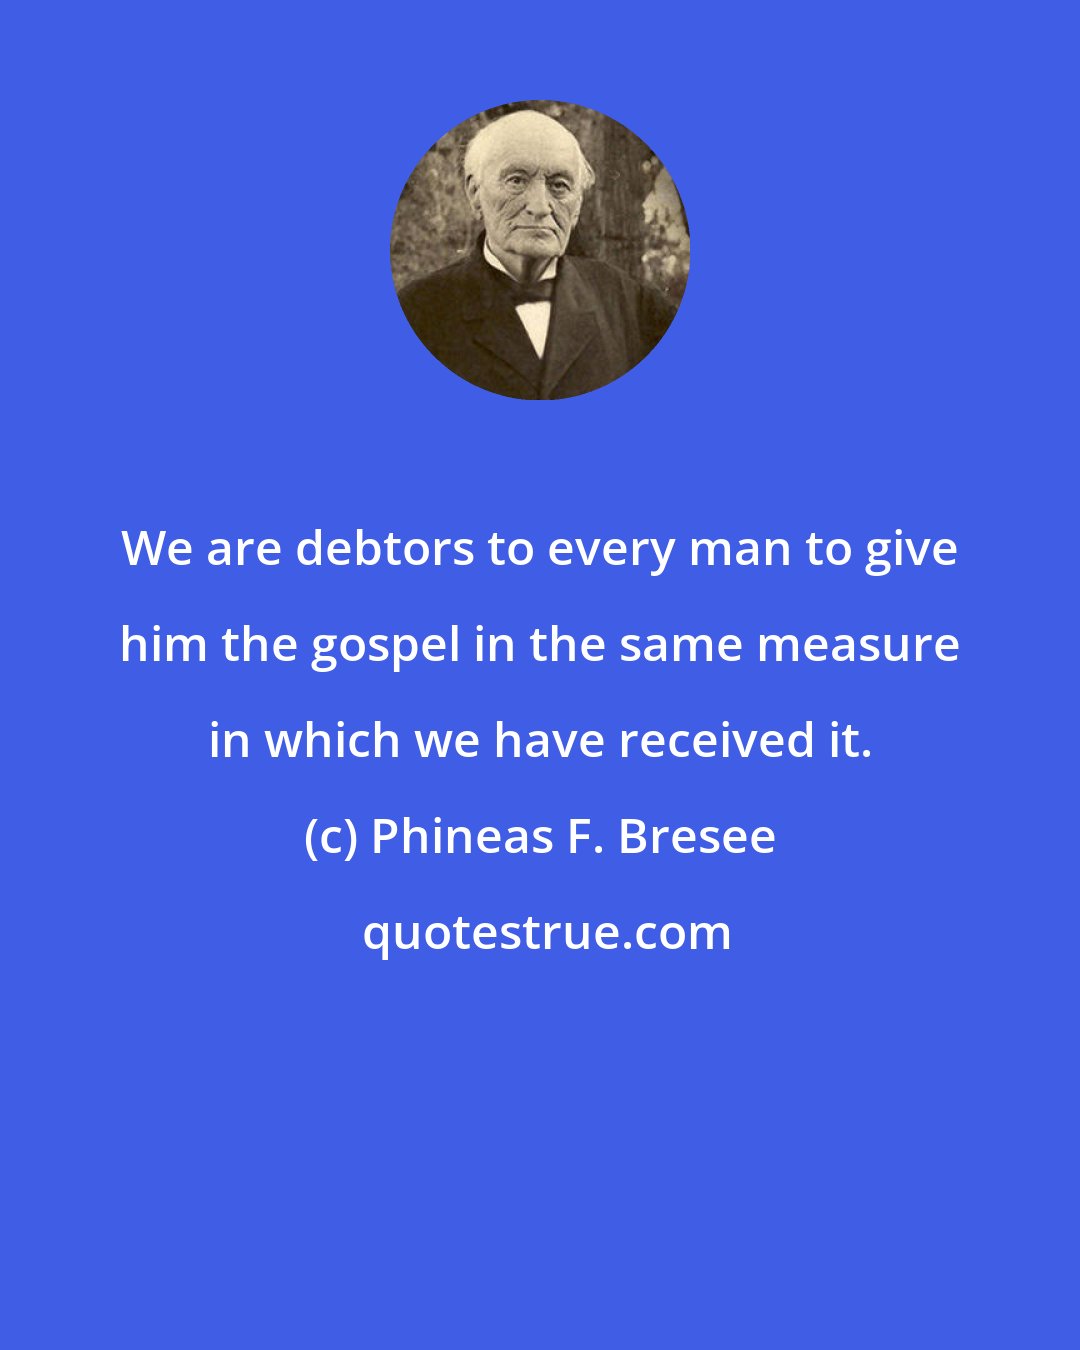 Phineas F. Bresee: We are debtors to every man to give him the gospel in the same measure in which we have received it.